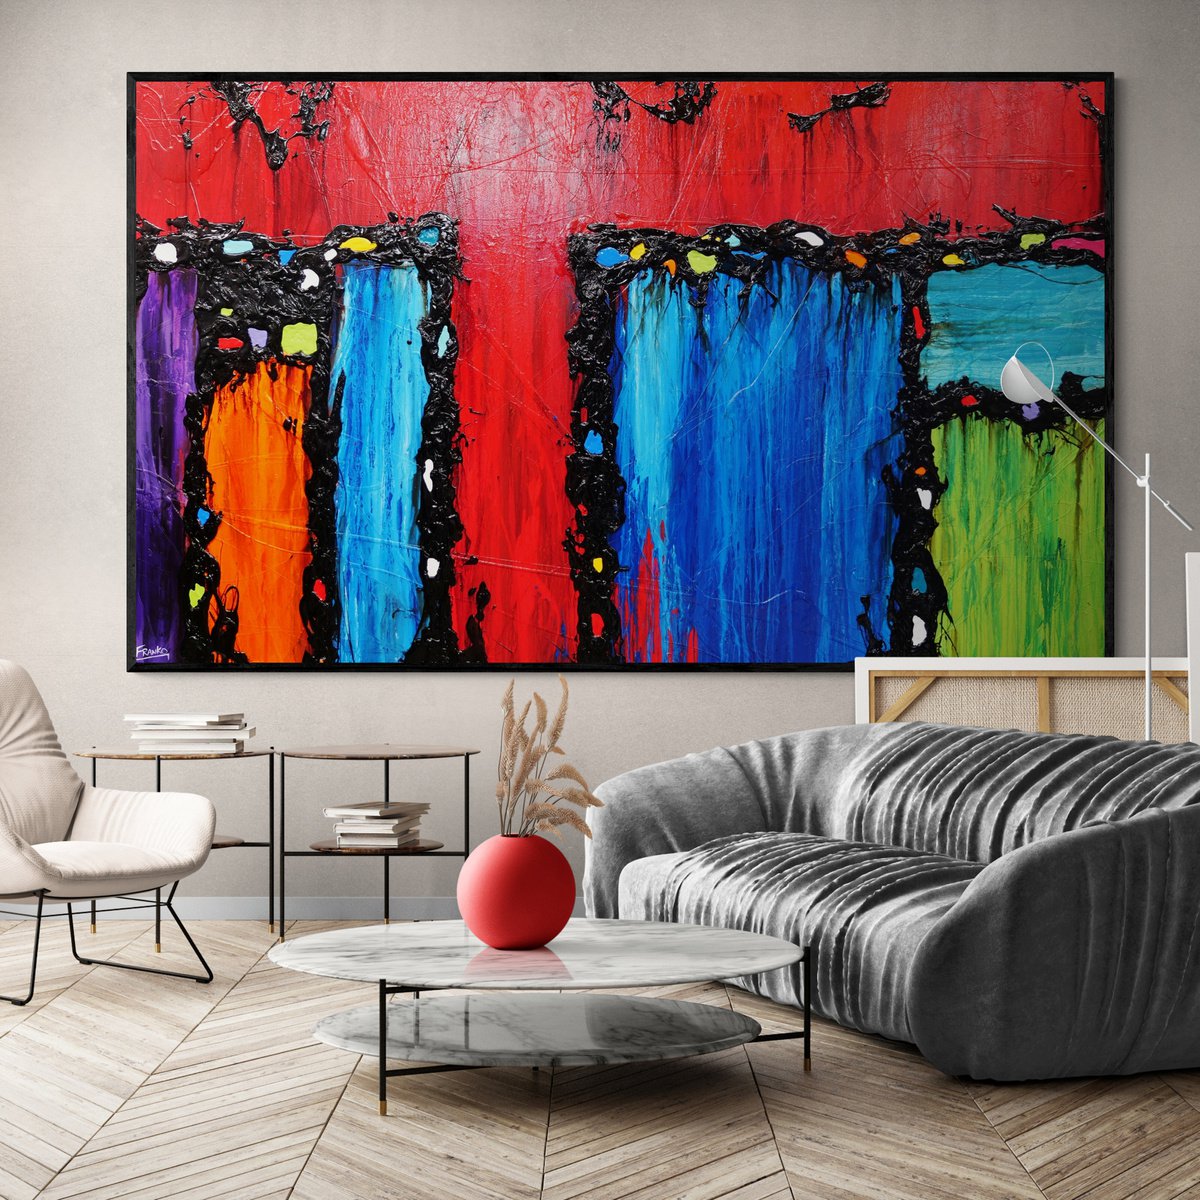 Circus Extravaganza 250cm x 150cm Red Textured Abstract Art by Franko